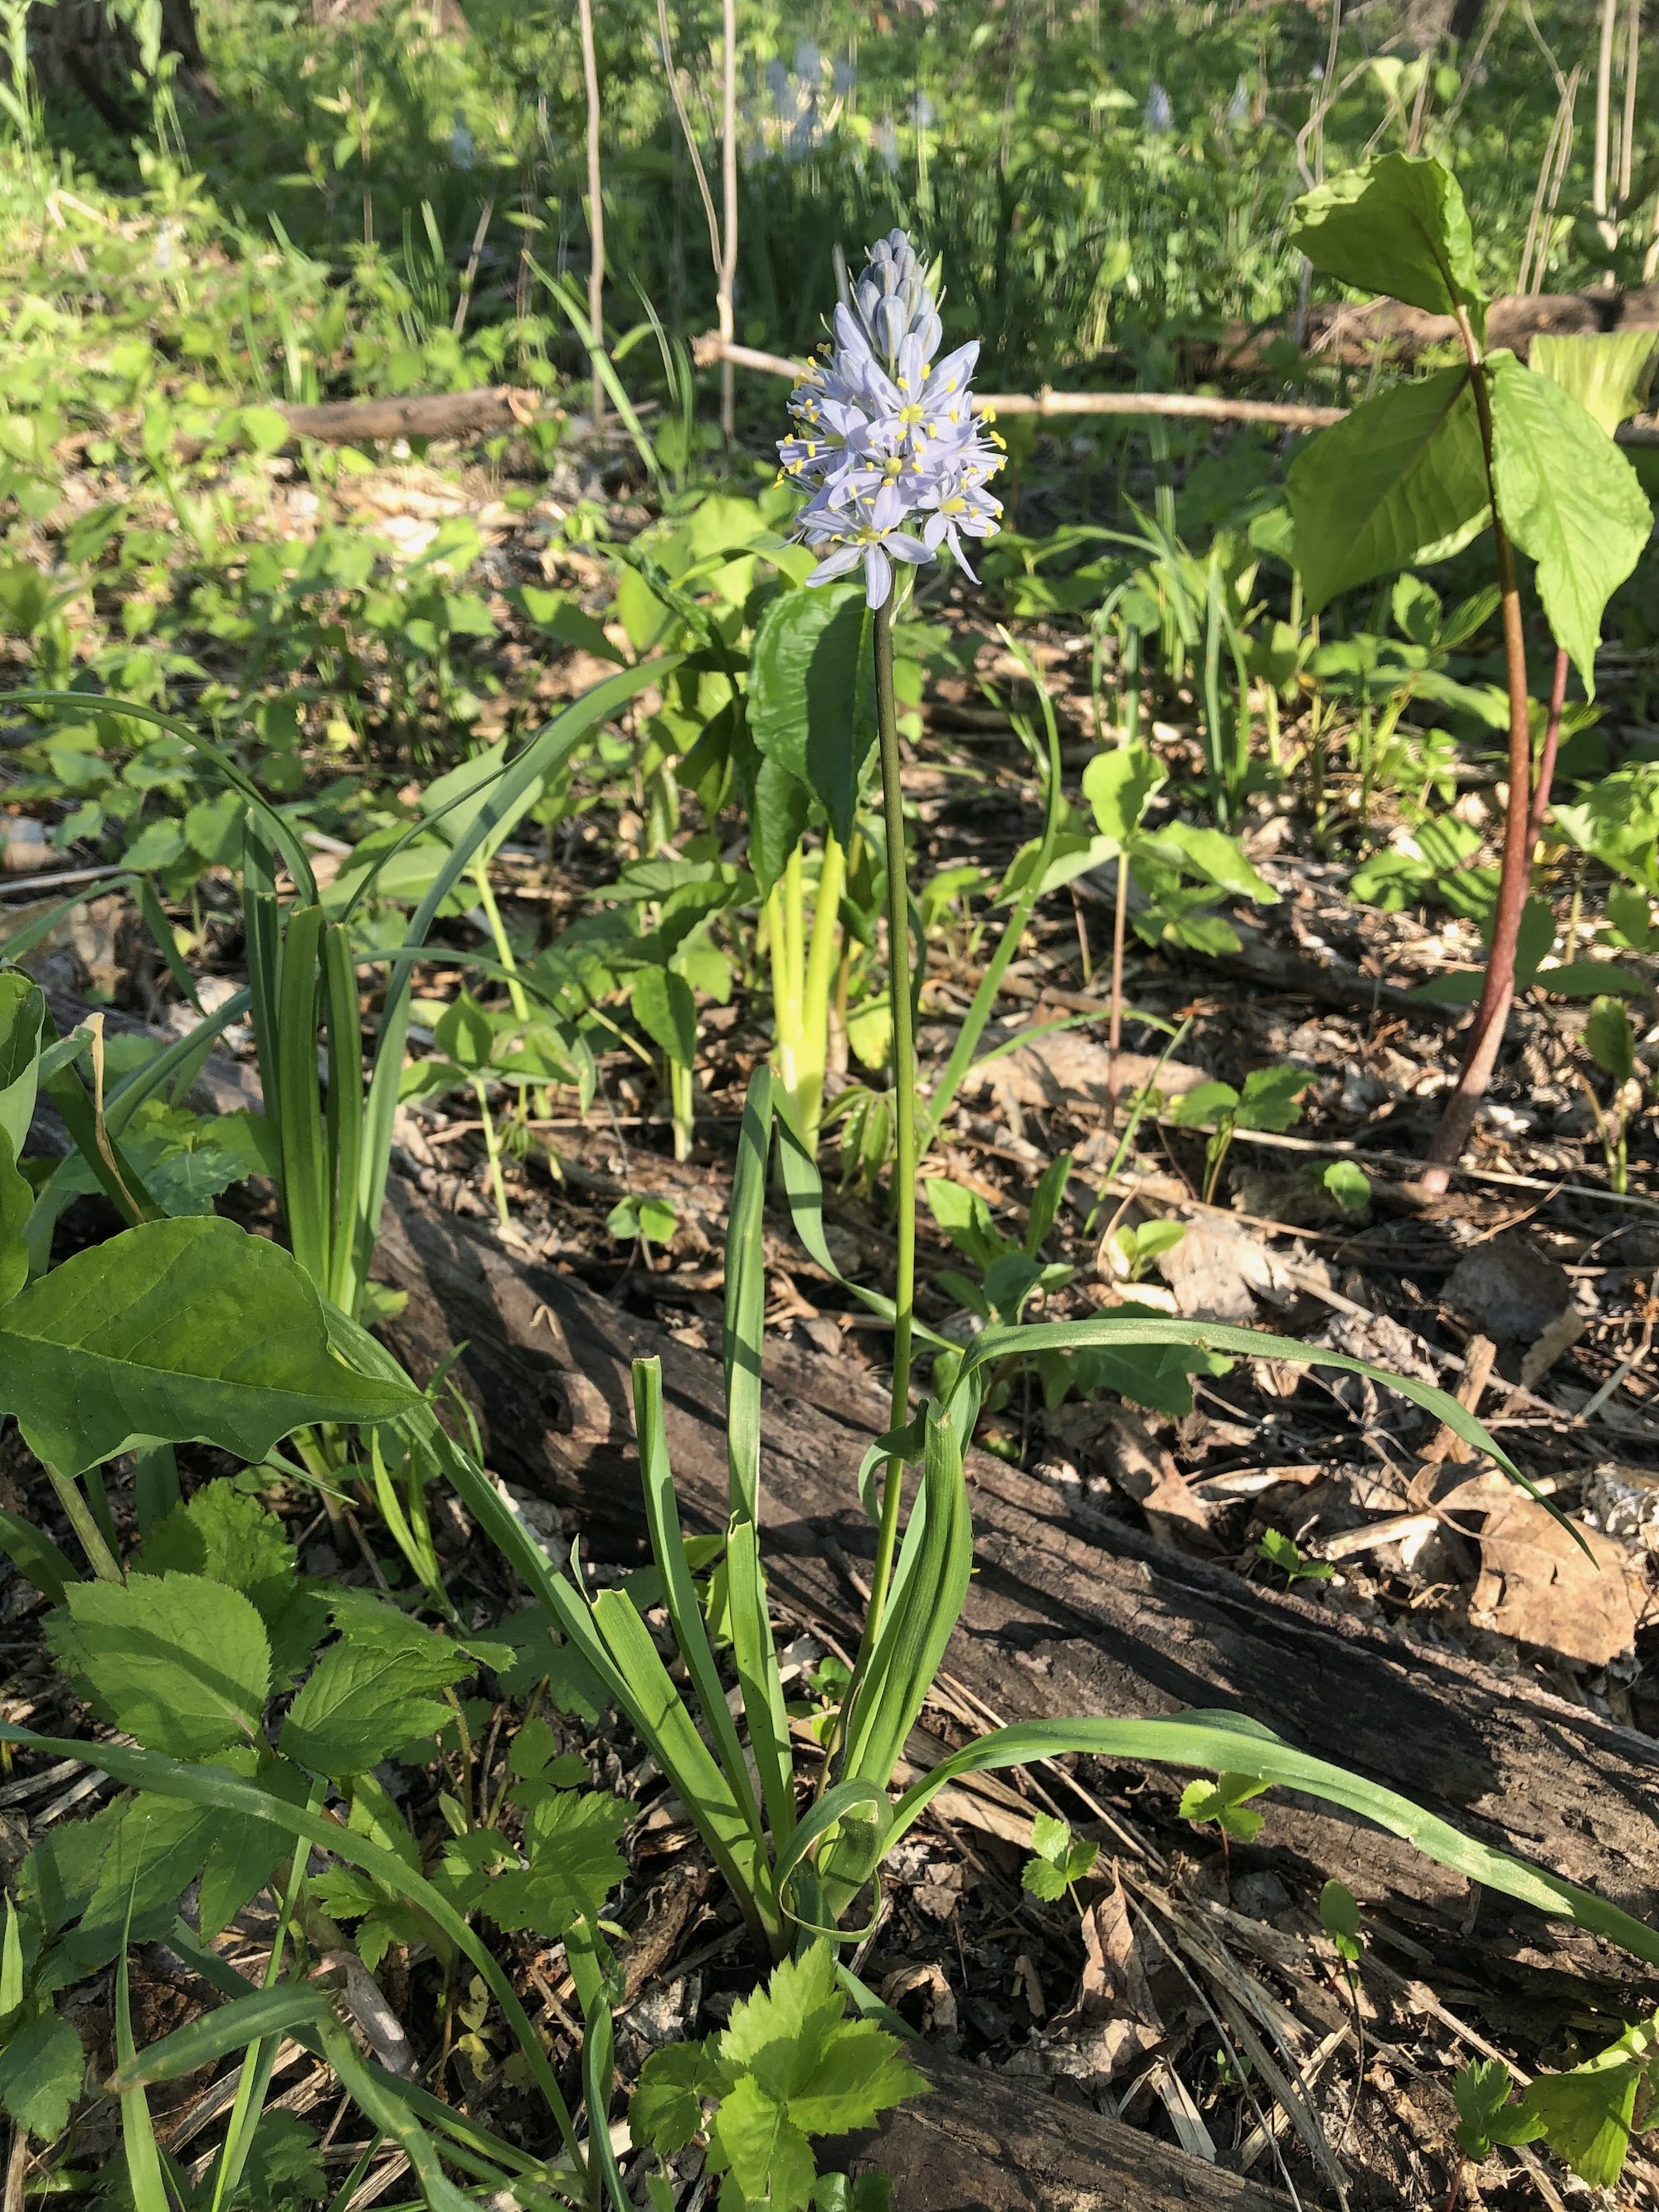 Wild Hyacinth in woods between Marion Dunn and Oak Savanna on May 13, 2021.